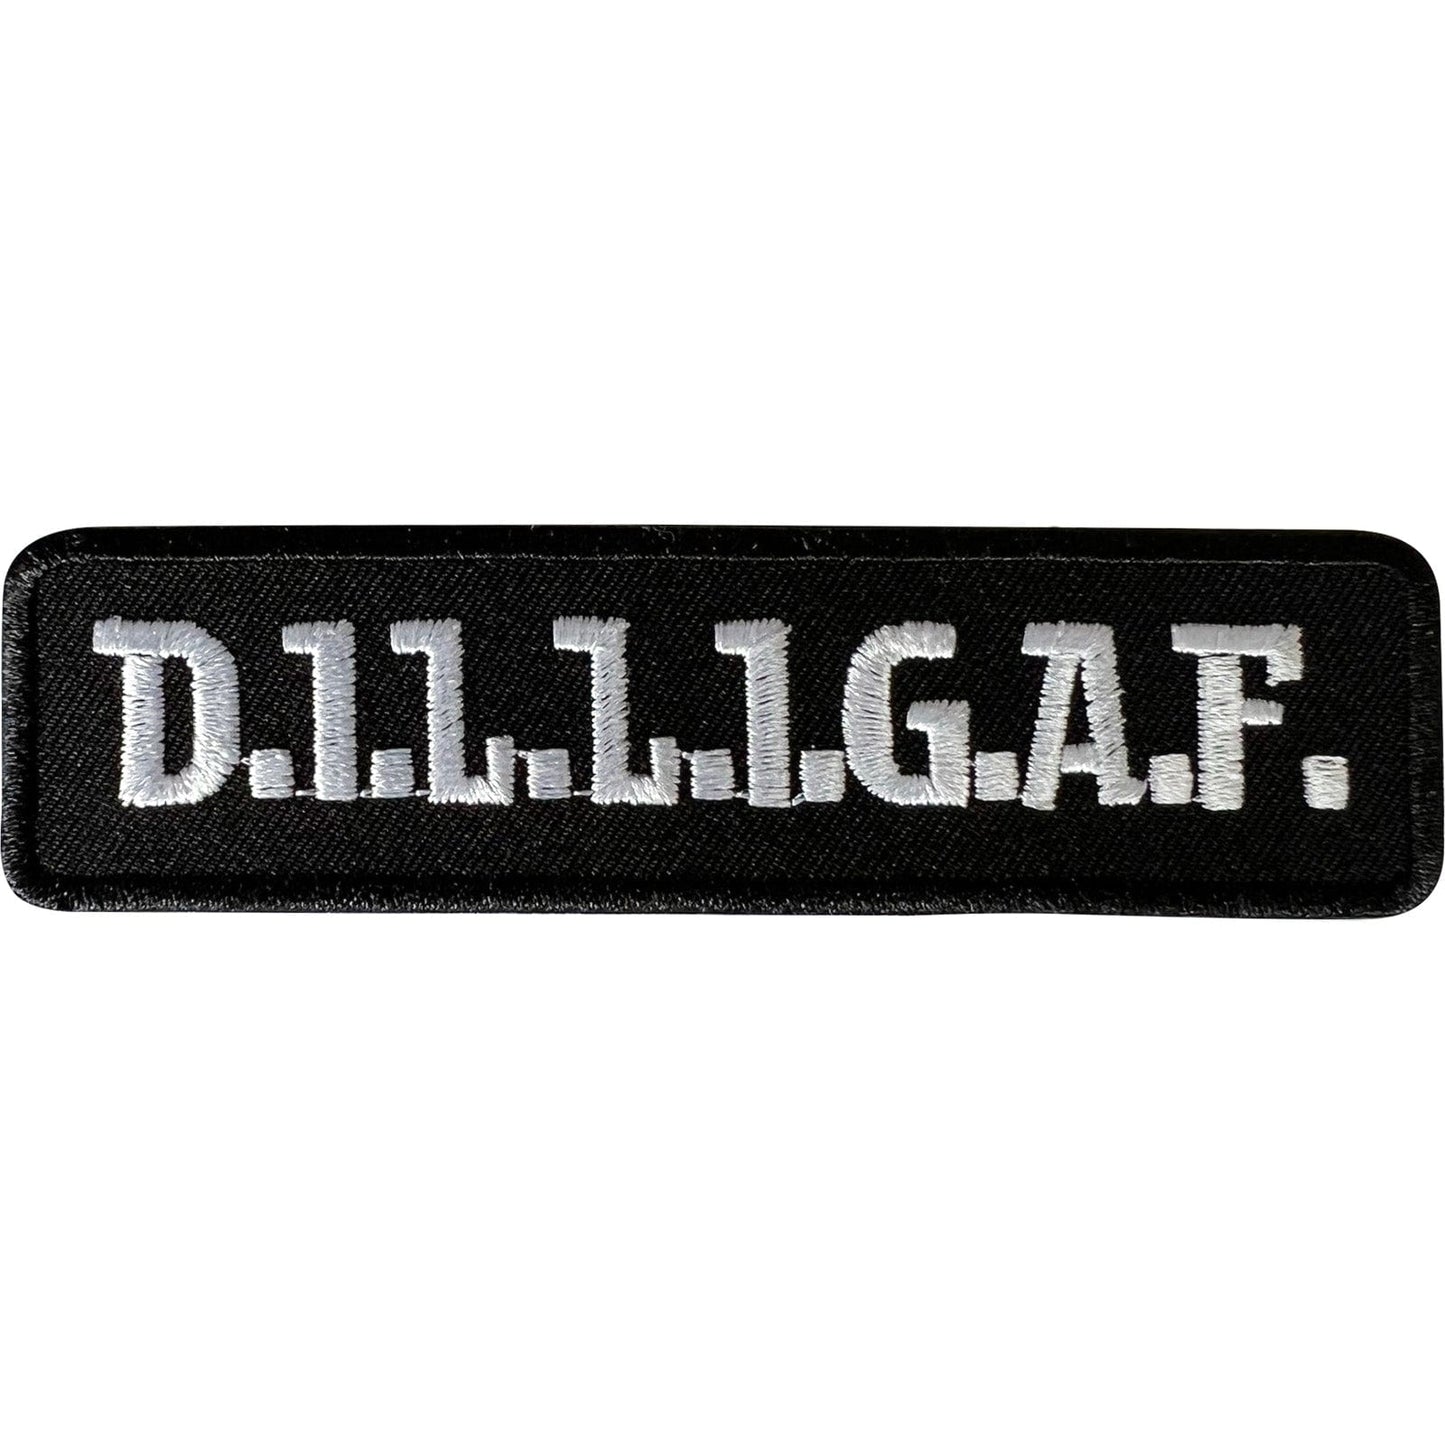 DILLIGAF Patch Iron Sew On Clothes Denim Jeans Skirt T Shirt Embroidered Badge